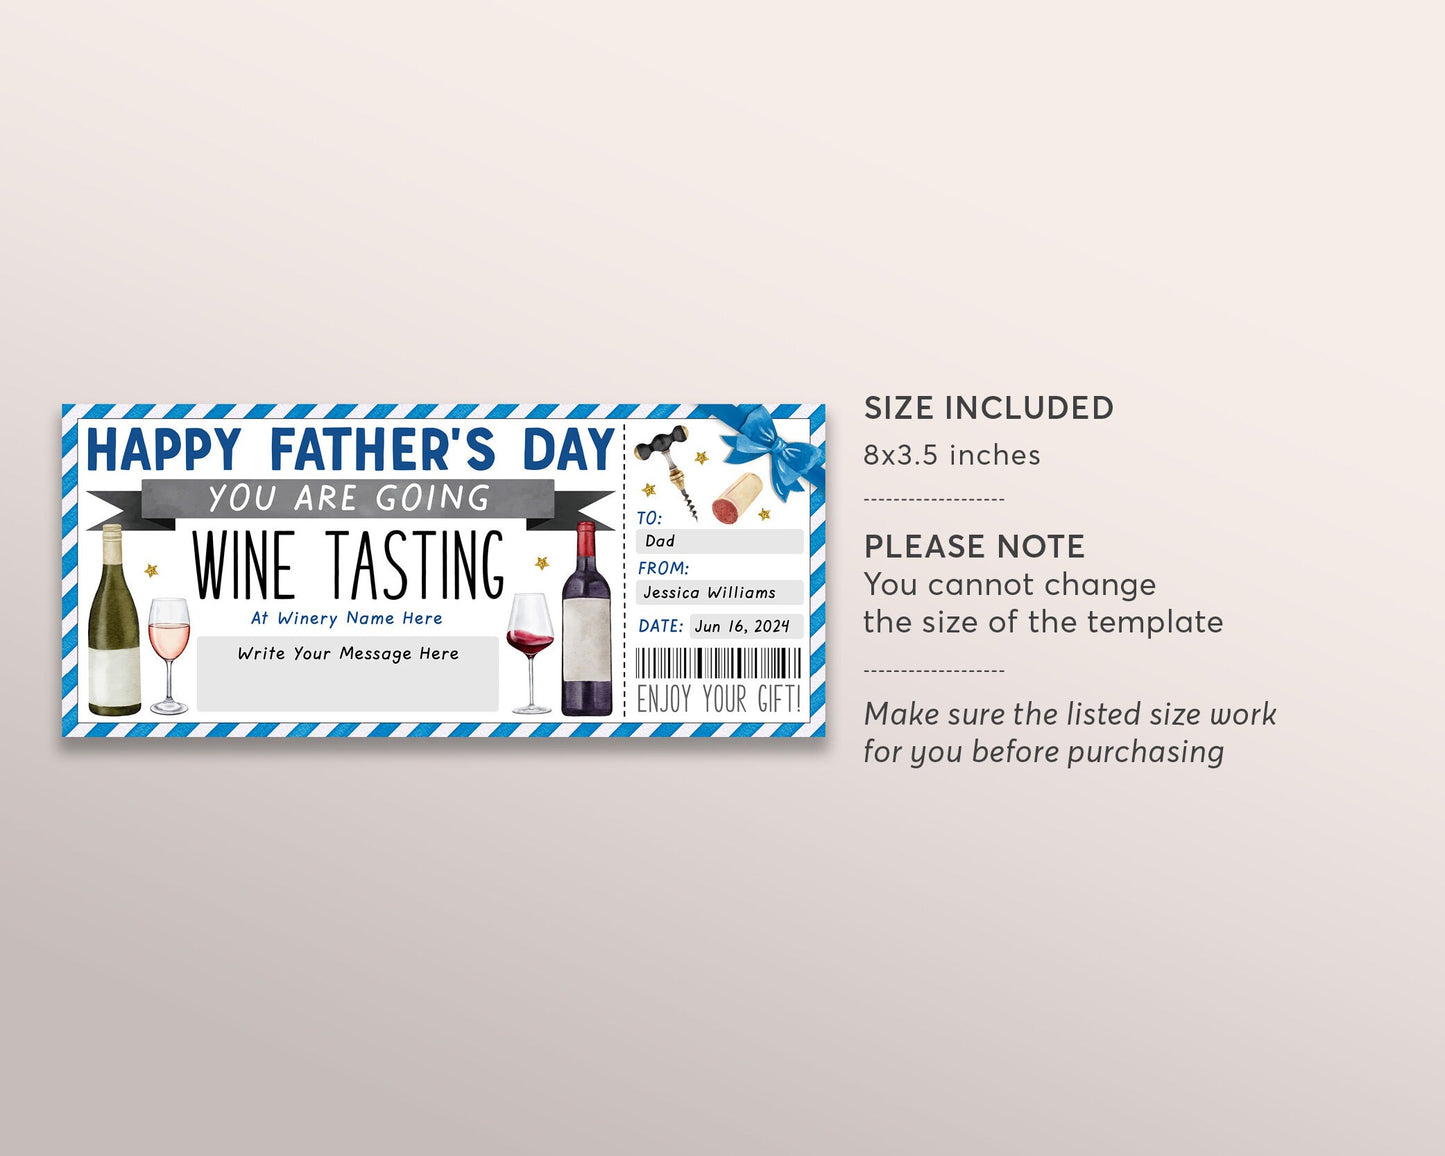 Fathers Day Wine Tasting Gift Voucher Editable Template, Surprise Wine Tasting Ticket Gift Certificate For Dad, Winery Vineyard Coupon